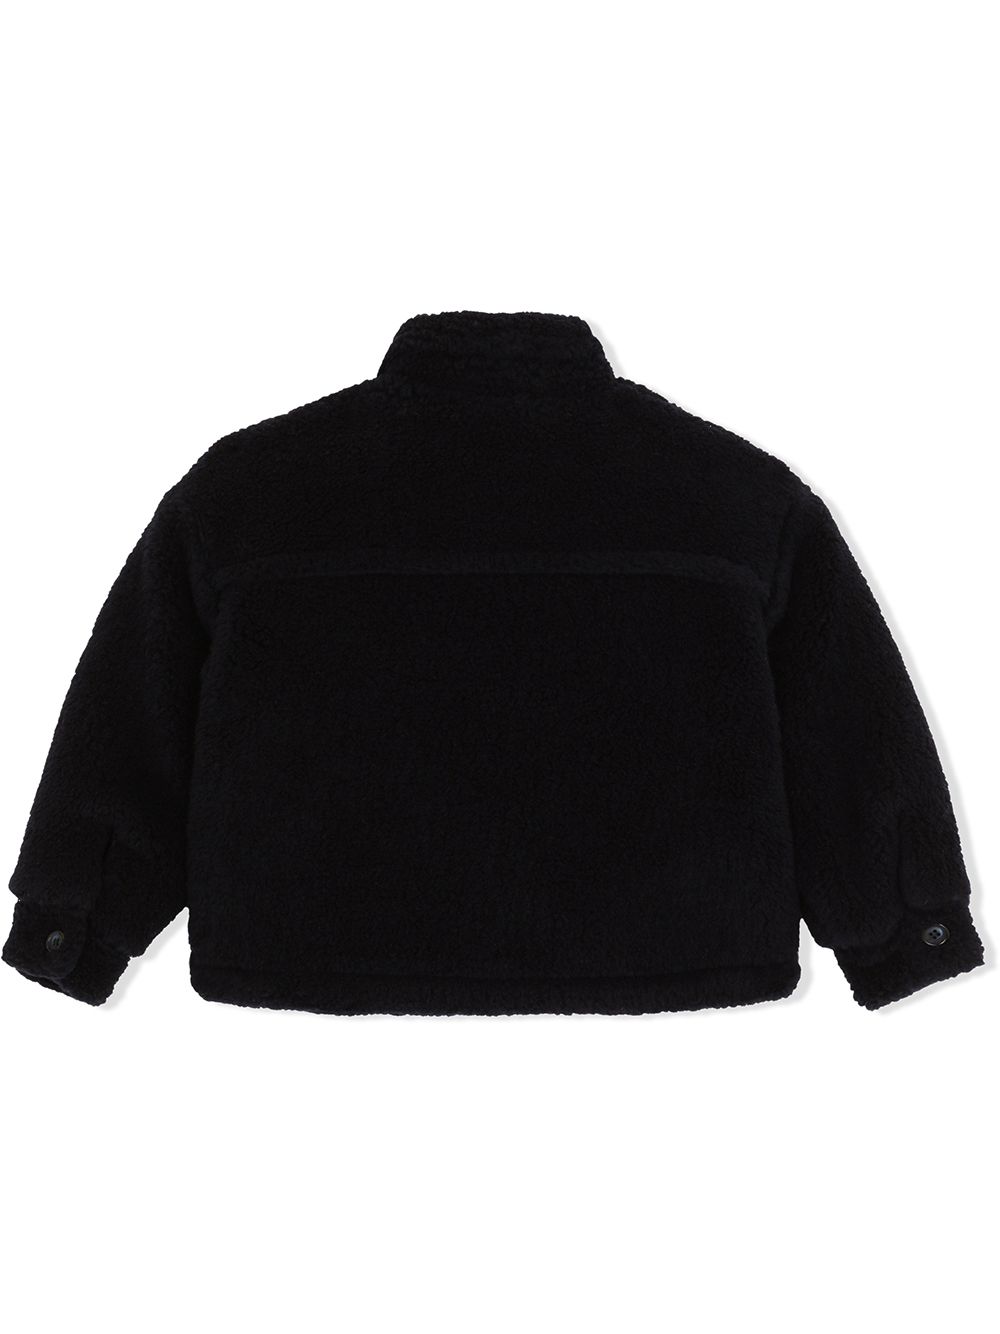 Image 2 of Dolce & Gabbana Kids button-up teddy coat